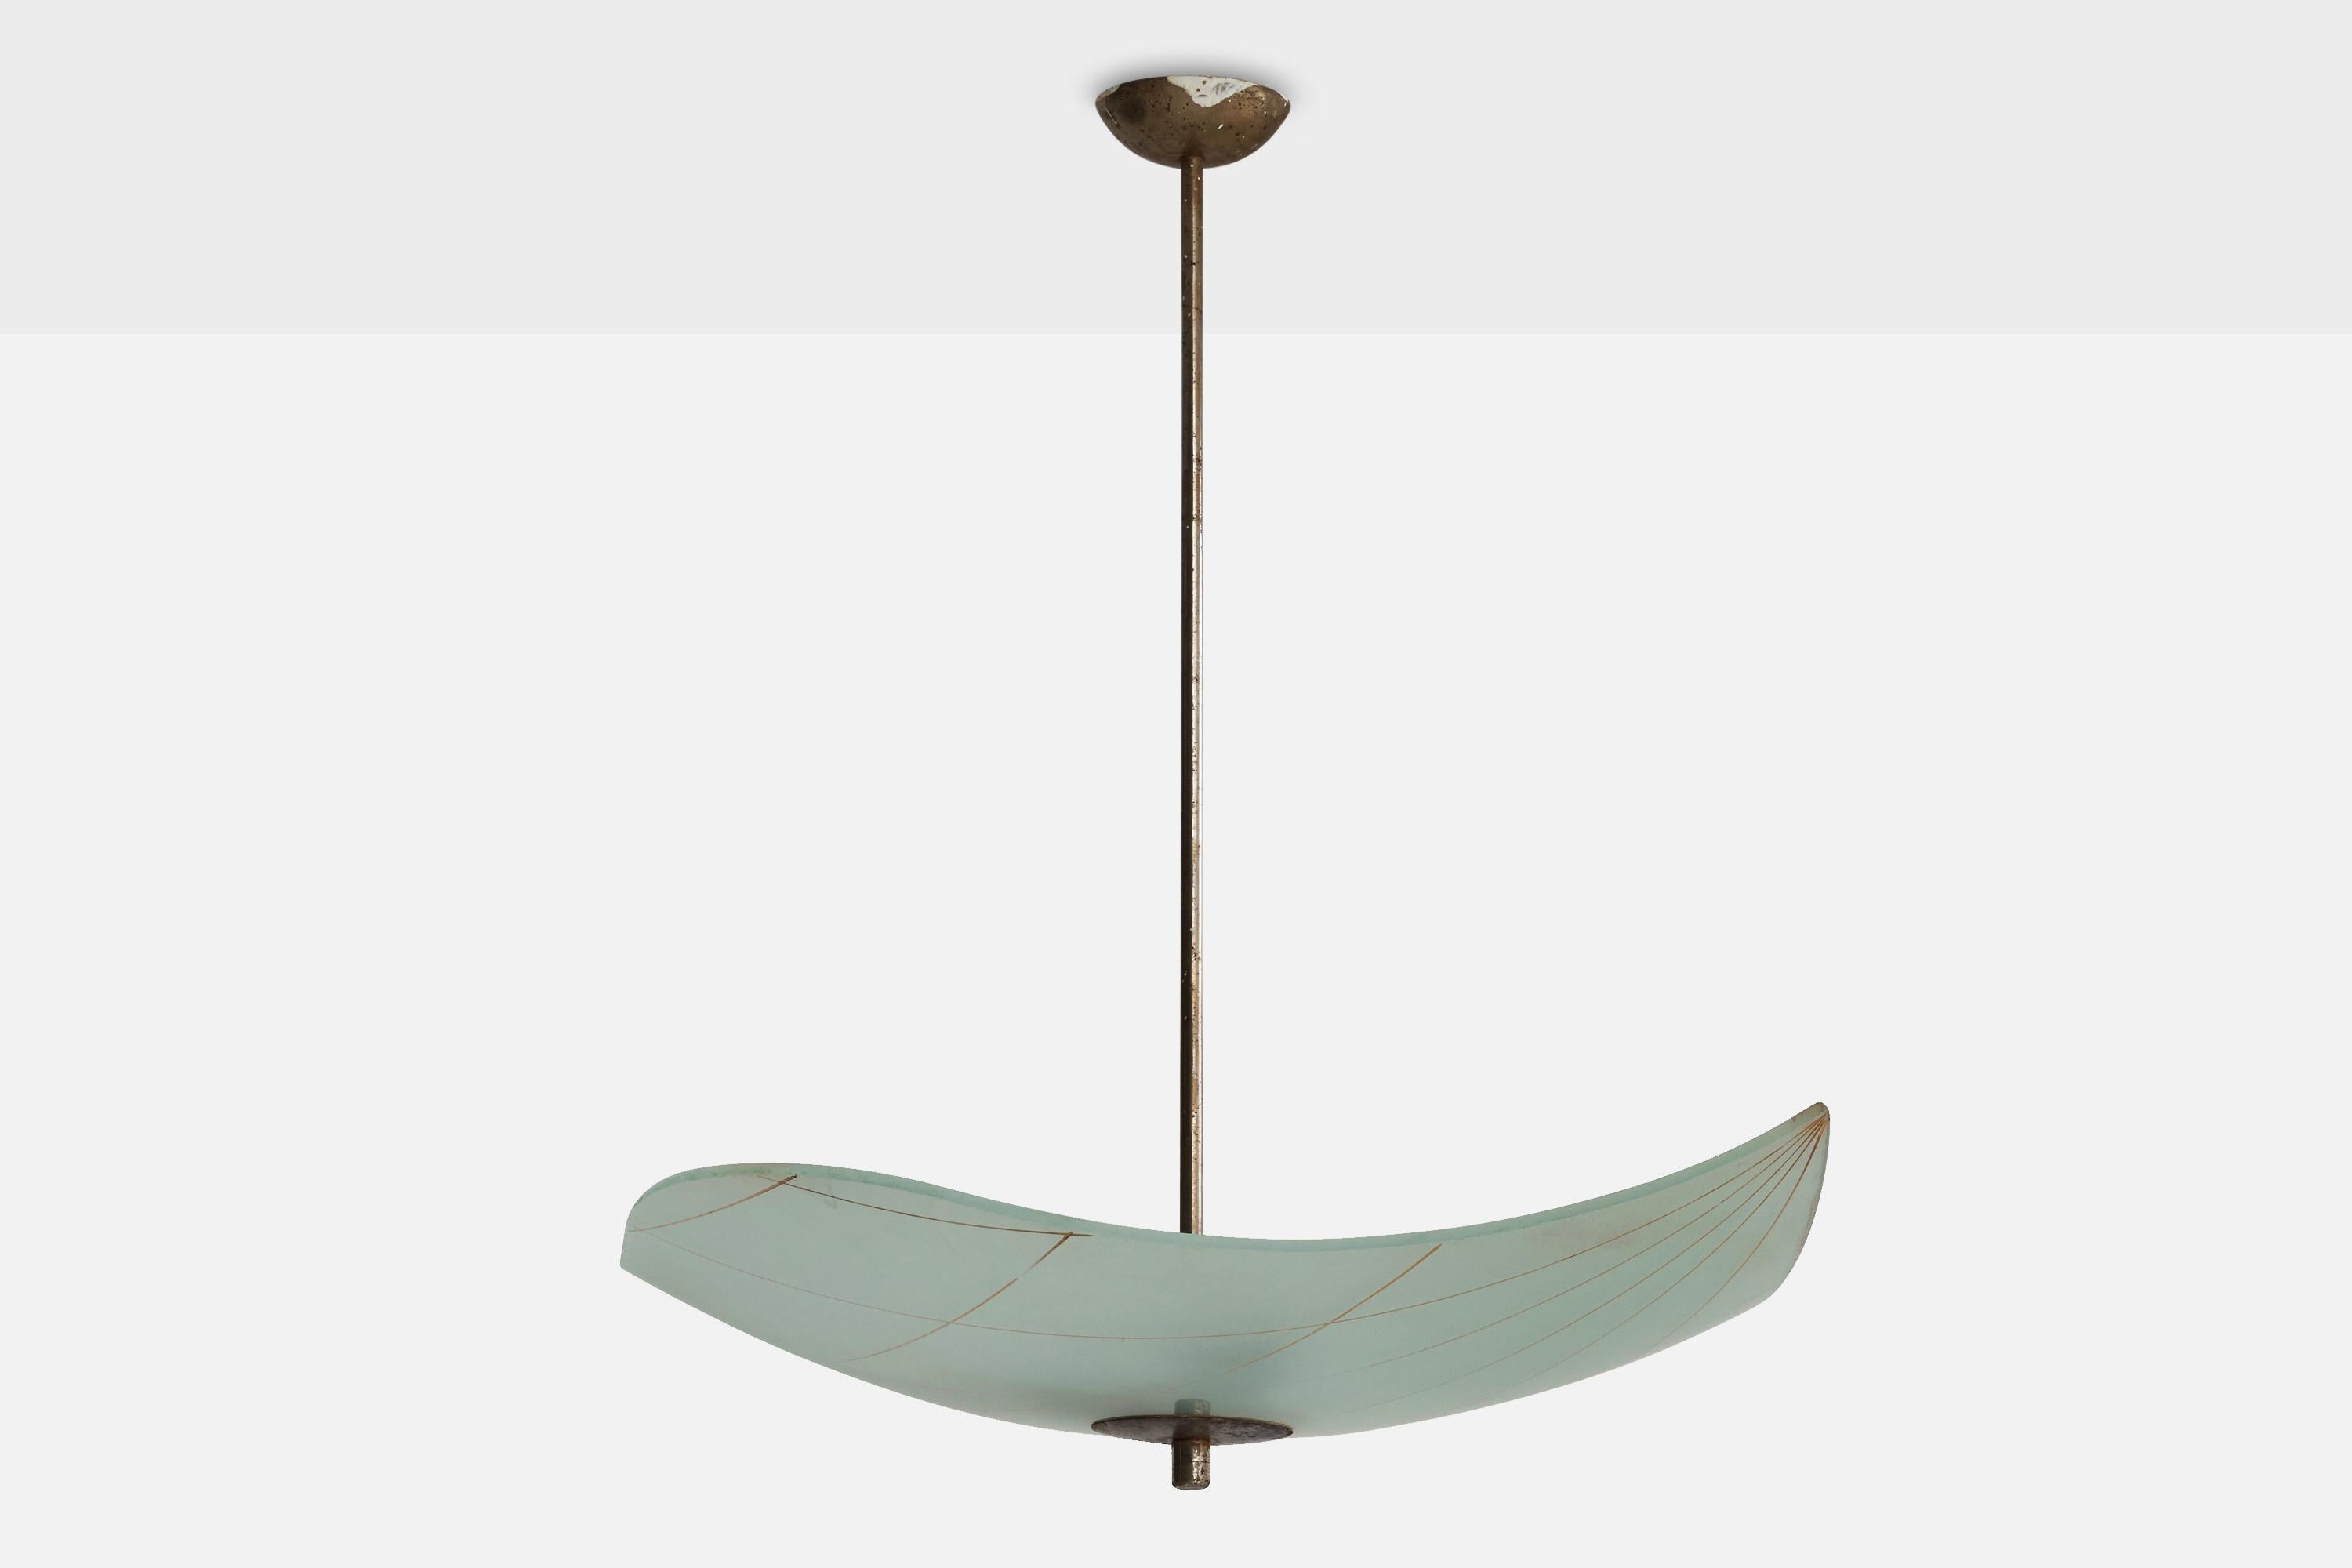 A steel and etched glass pendant light designed and produced in Sweden, 1940s.

Dimensions of canopy (inches): 1.1” H x 3.5” Diameter
Socket takes standard E-26 bulbs. 3 sockets.There is no maximum wattage stated on the fixture. All lighting will be